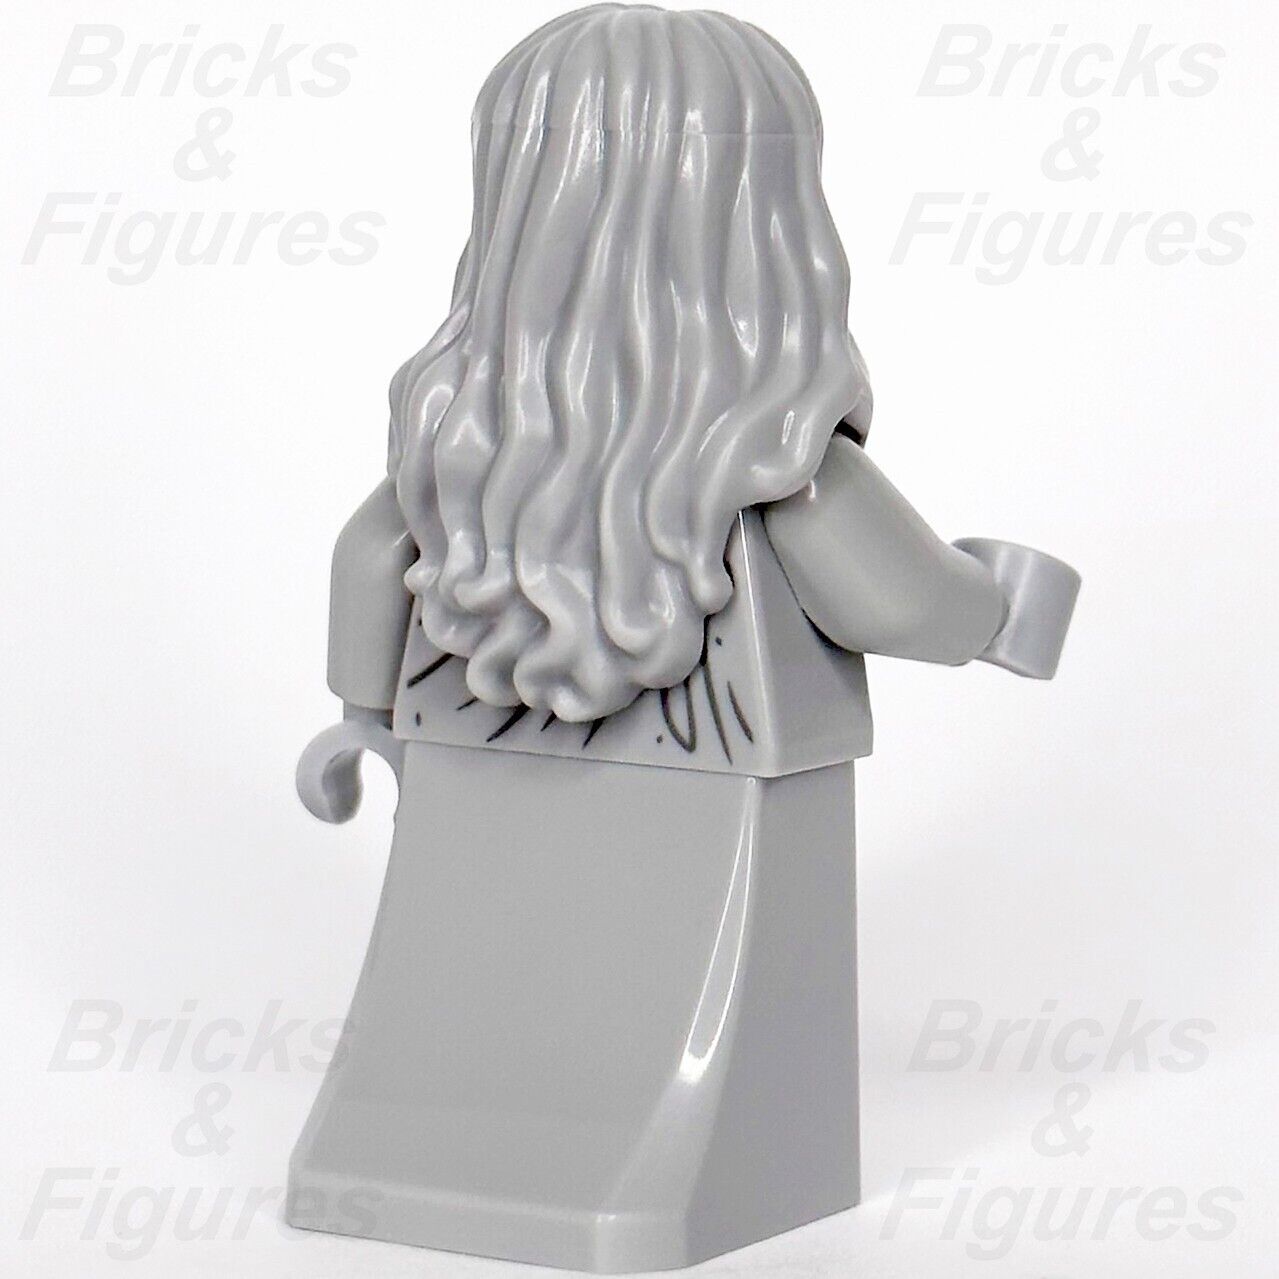 LEGO Elf Statue Minifigure The Hobbit & The Lord of the Rings 10316 lor130 LOTR - Bricks & Figures